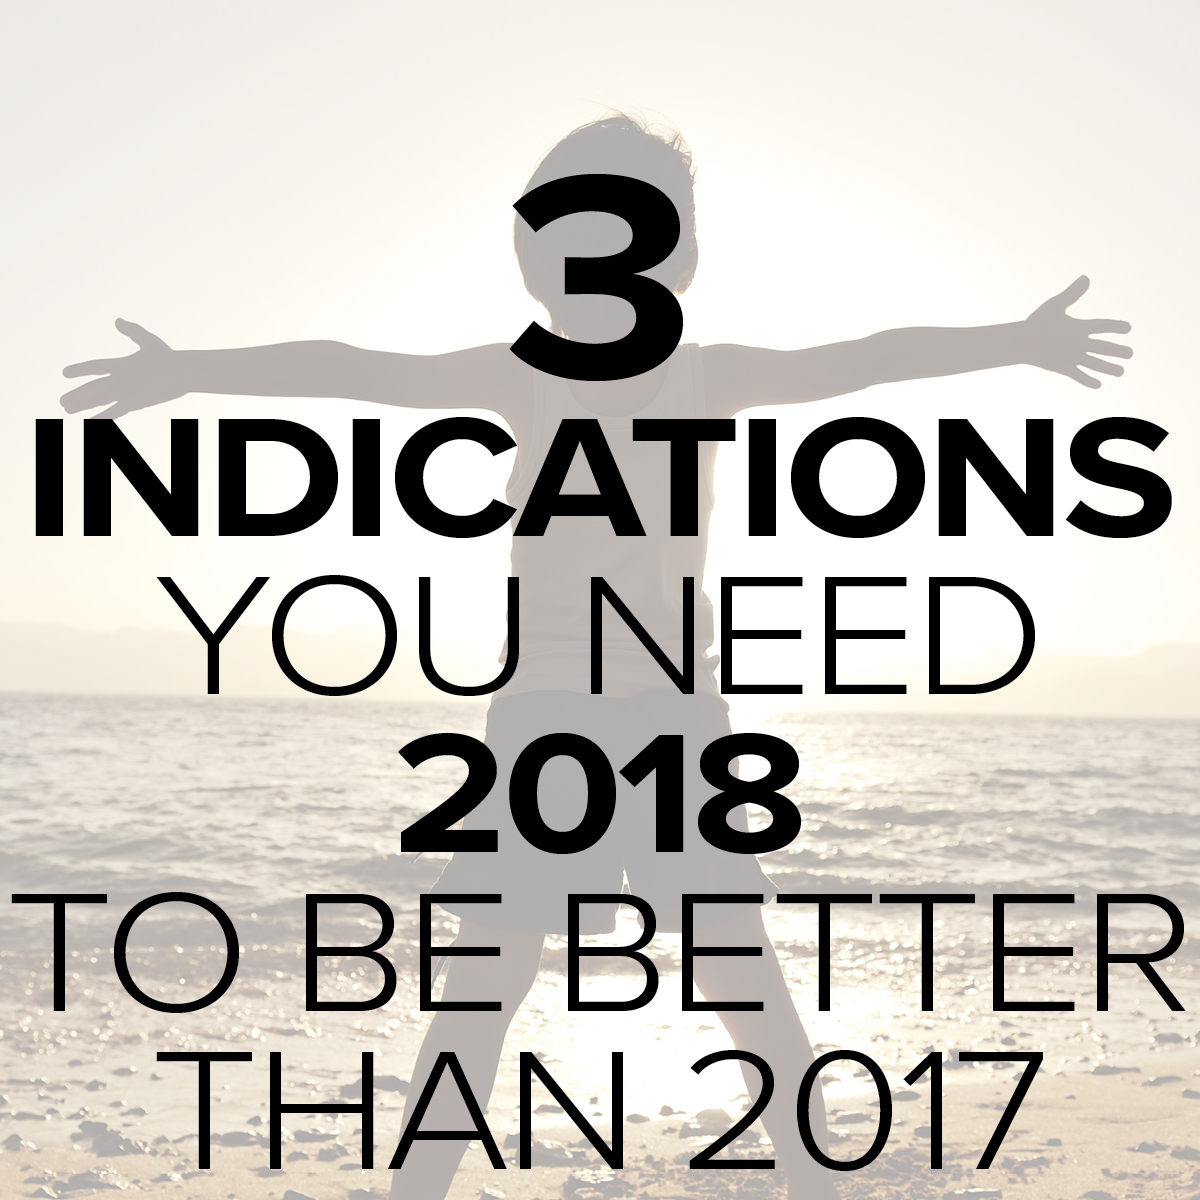 3 Indications You Need 2018 To Be Better Than 2017